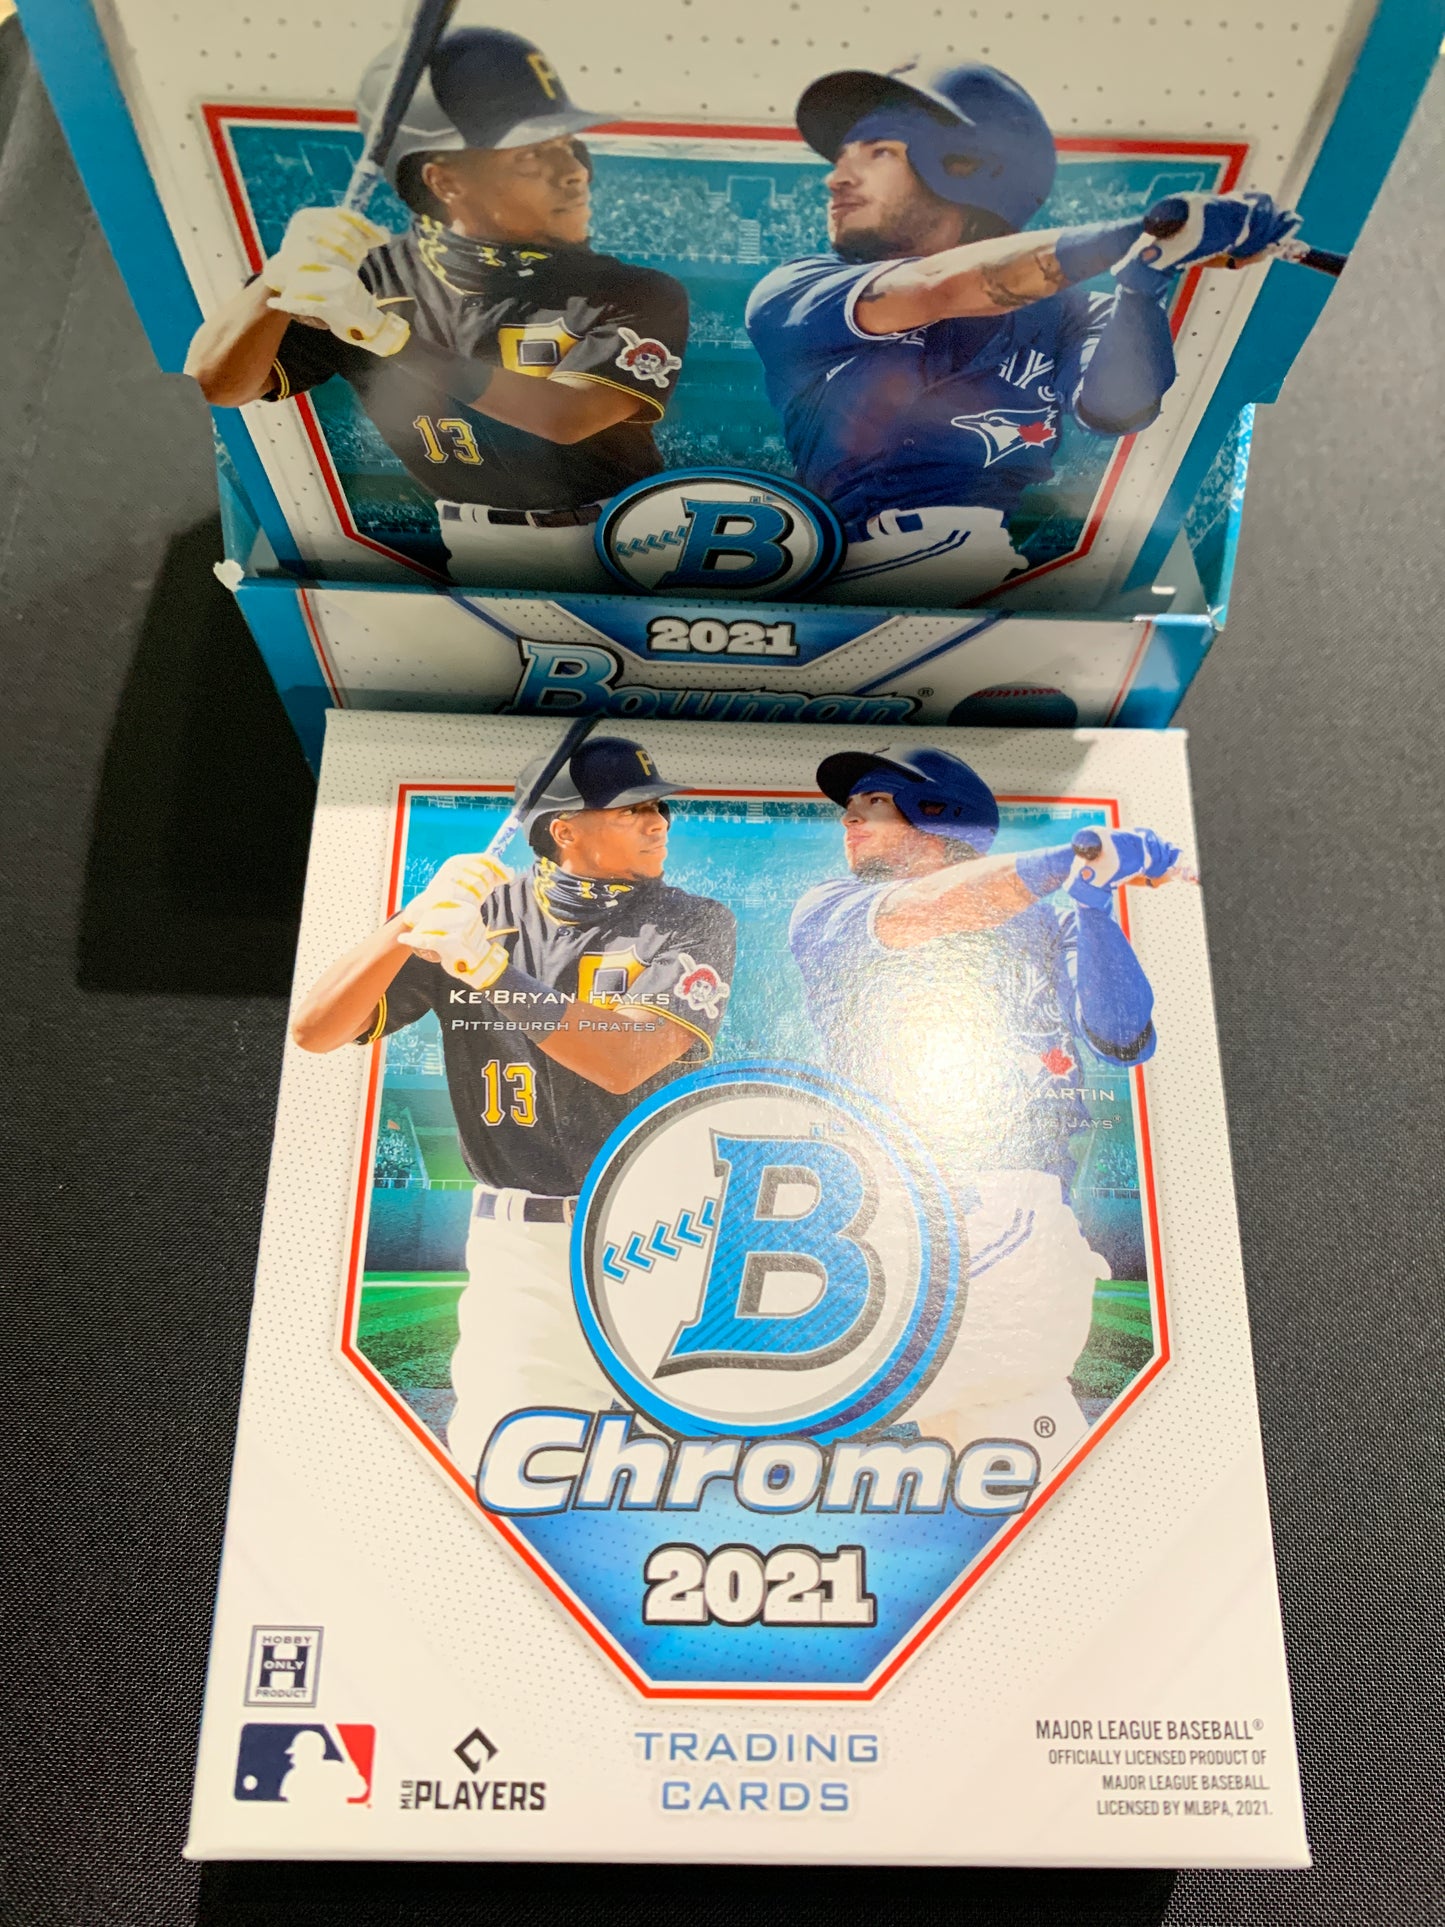 2021 Bowman Chrome Baseball Master Hobby Mini Box. Look for all the latest Rookies Joey Bart, Andrew Vaughn, Bobby Dalbec and many more Active